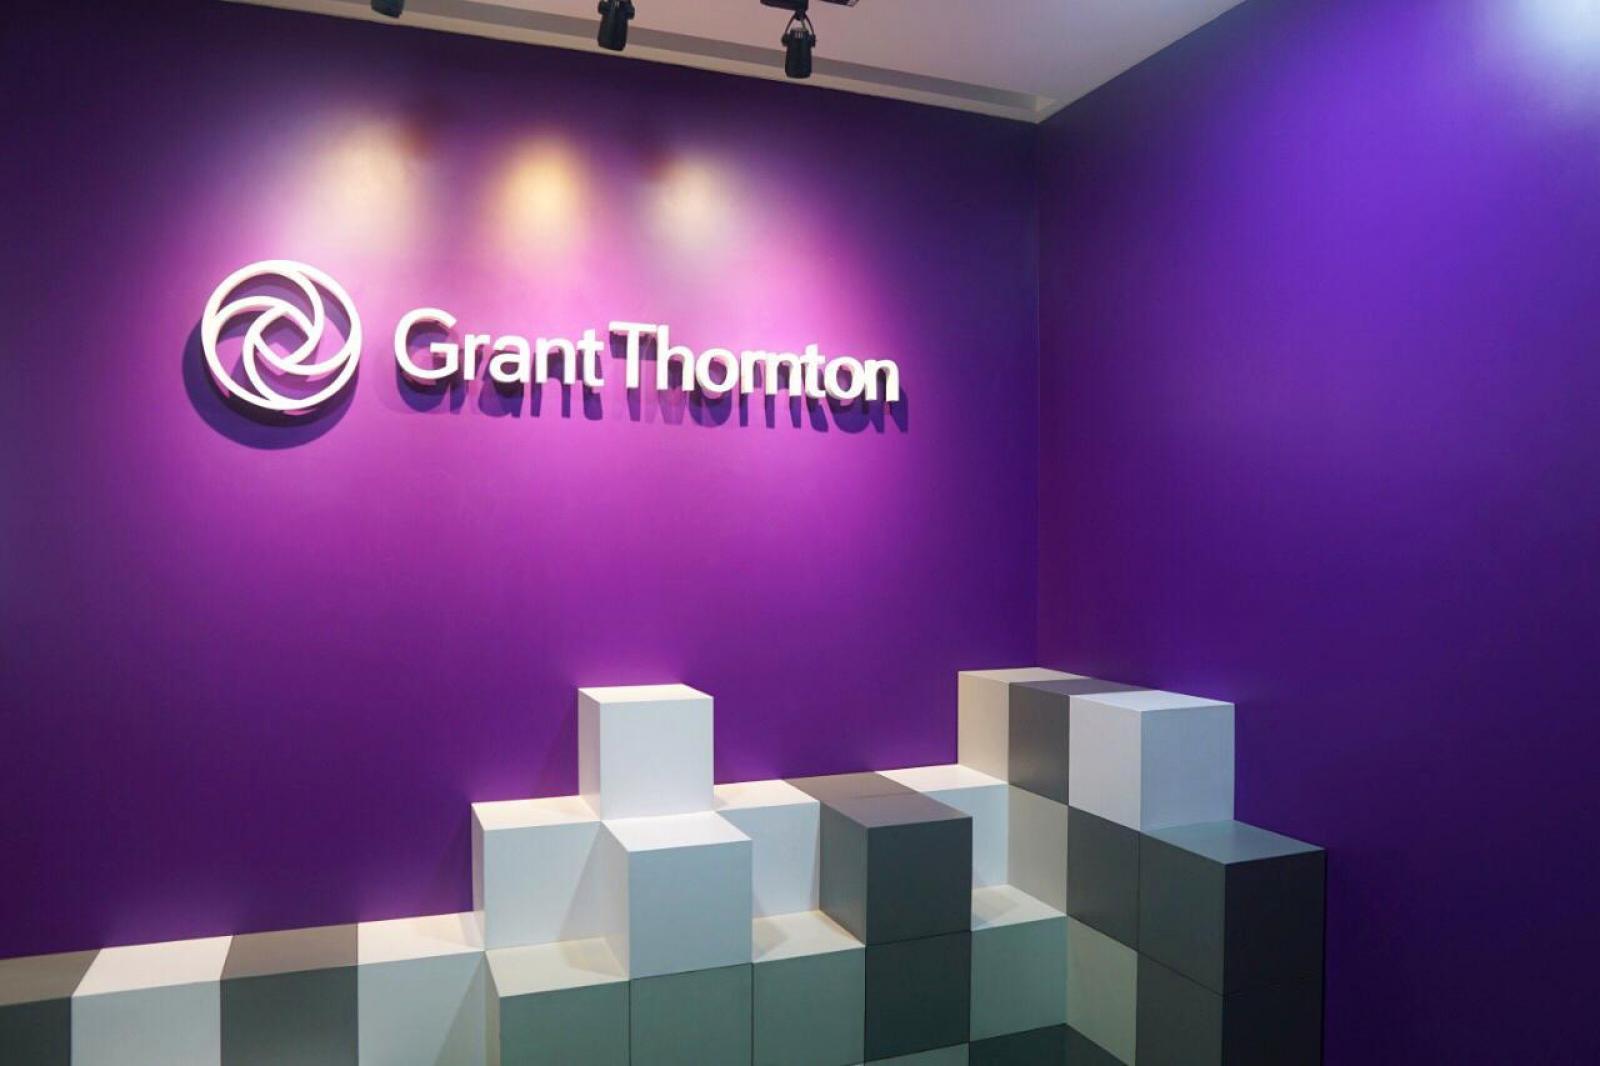 Grant Thornton share 5 tips for business resilience amid COVID19